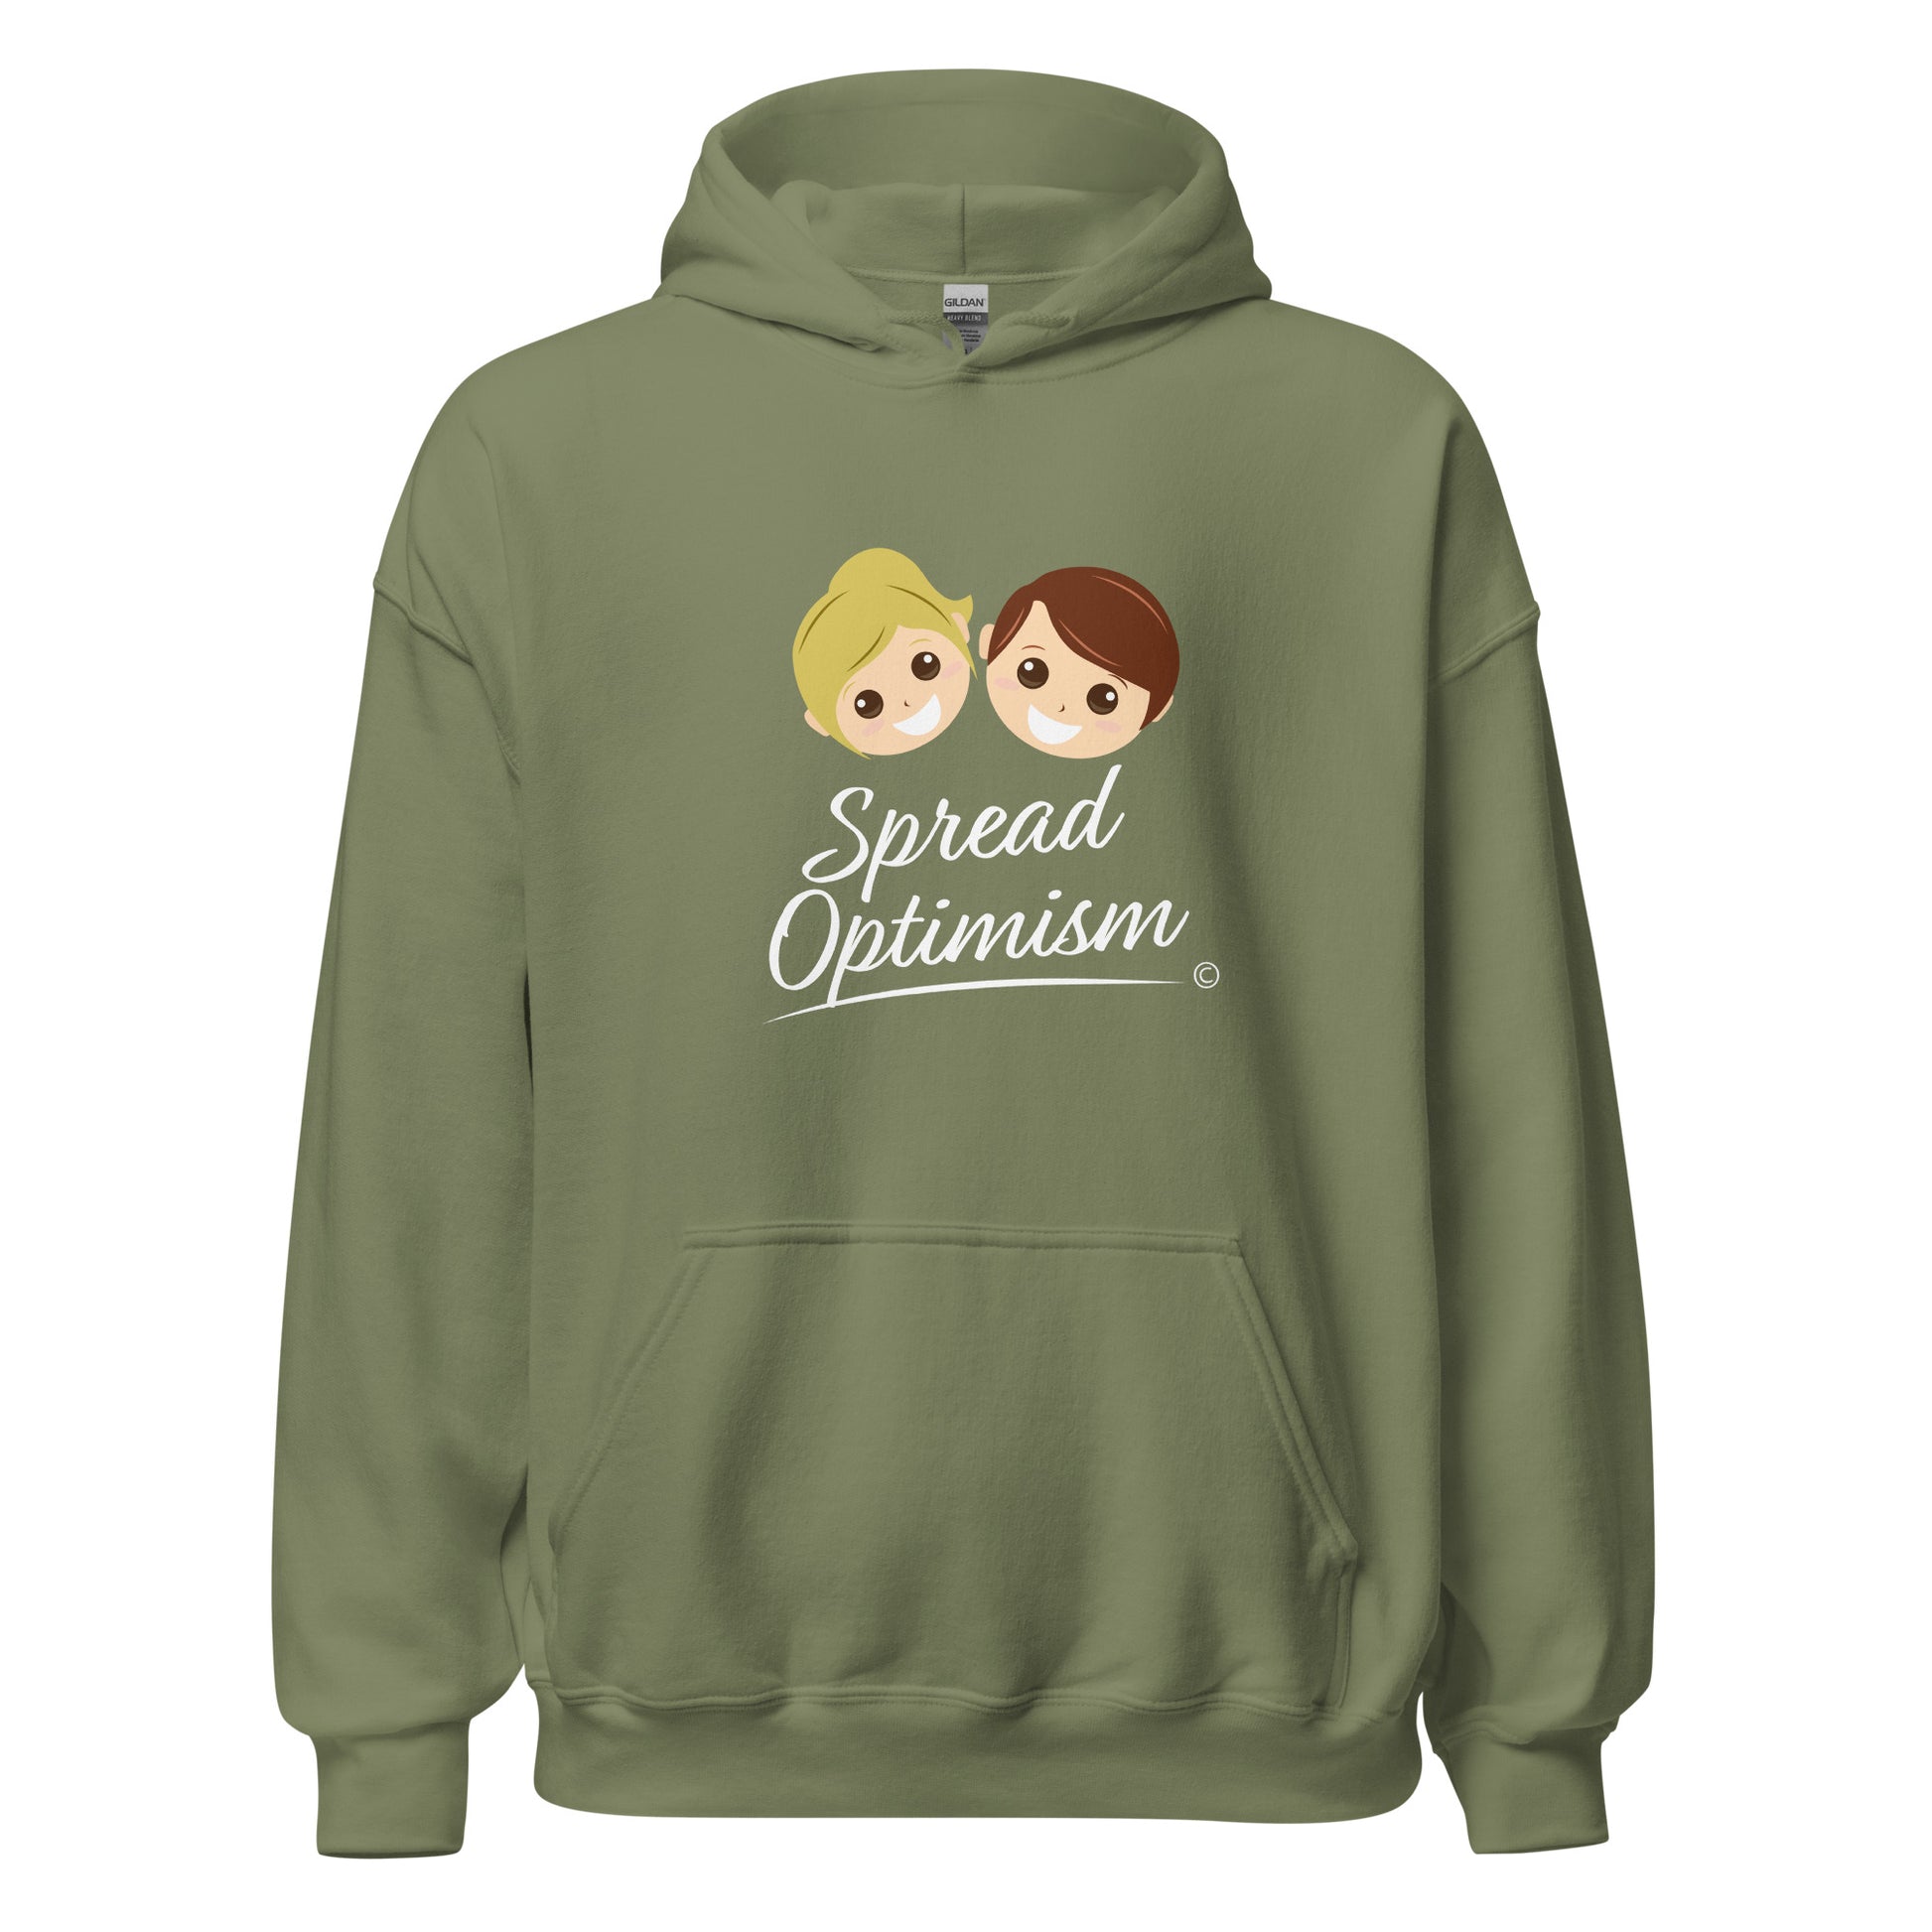 Outdoor unisex hoodies for him and her- Military Green